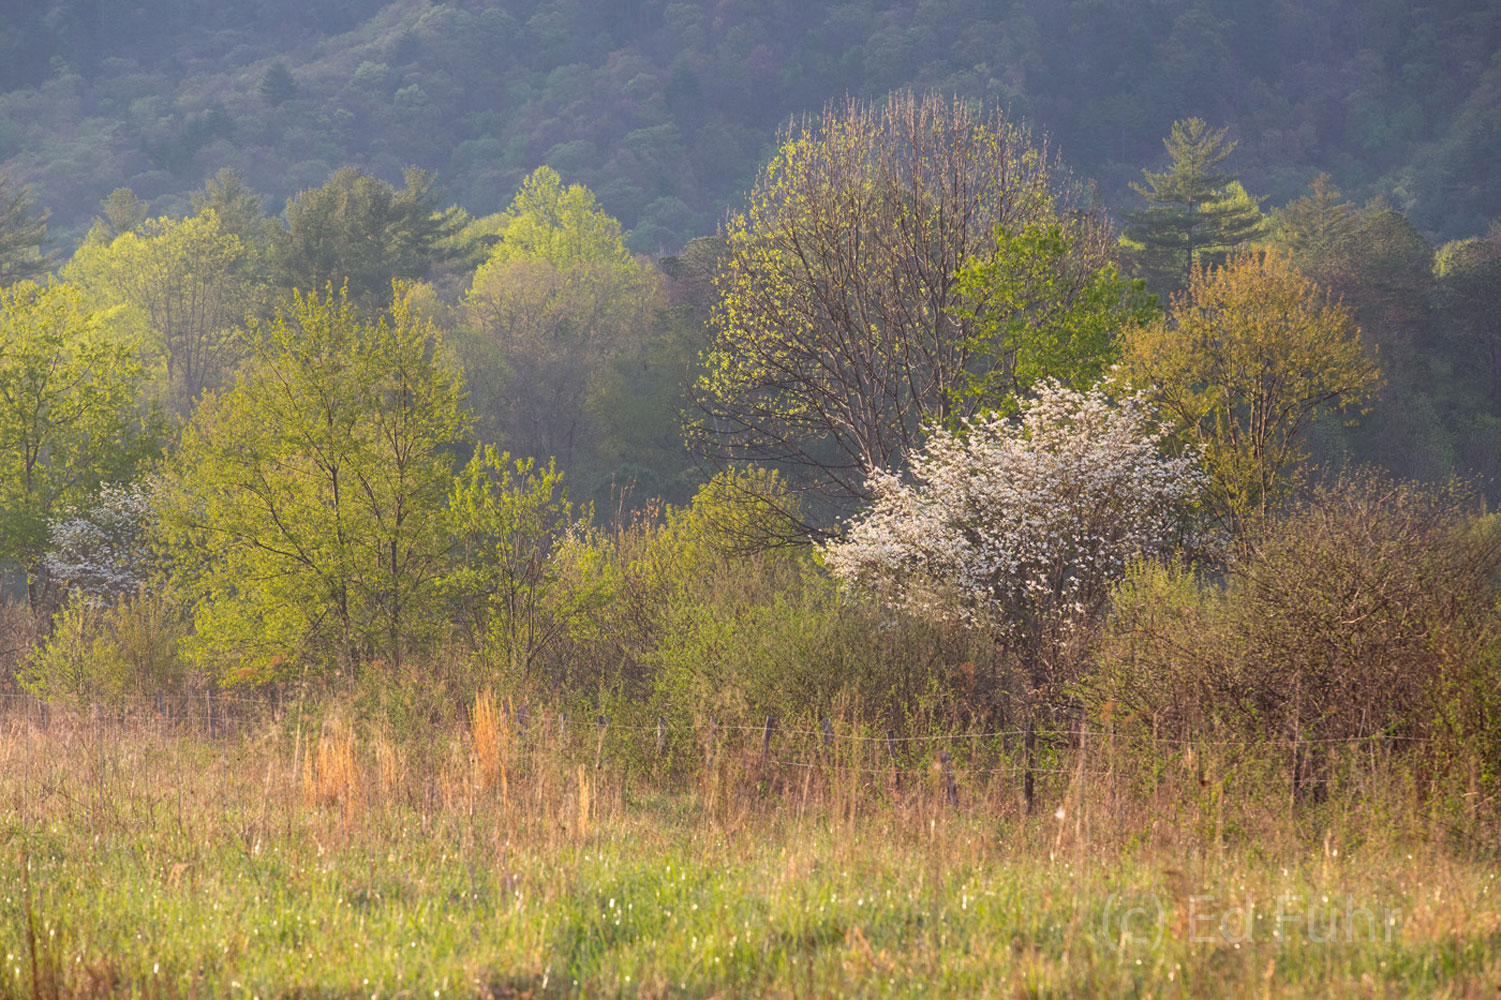 A mosaic of spring colors and dogwood blossoms paints a pasture's edge in Cades Cove.